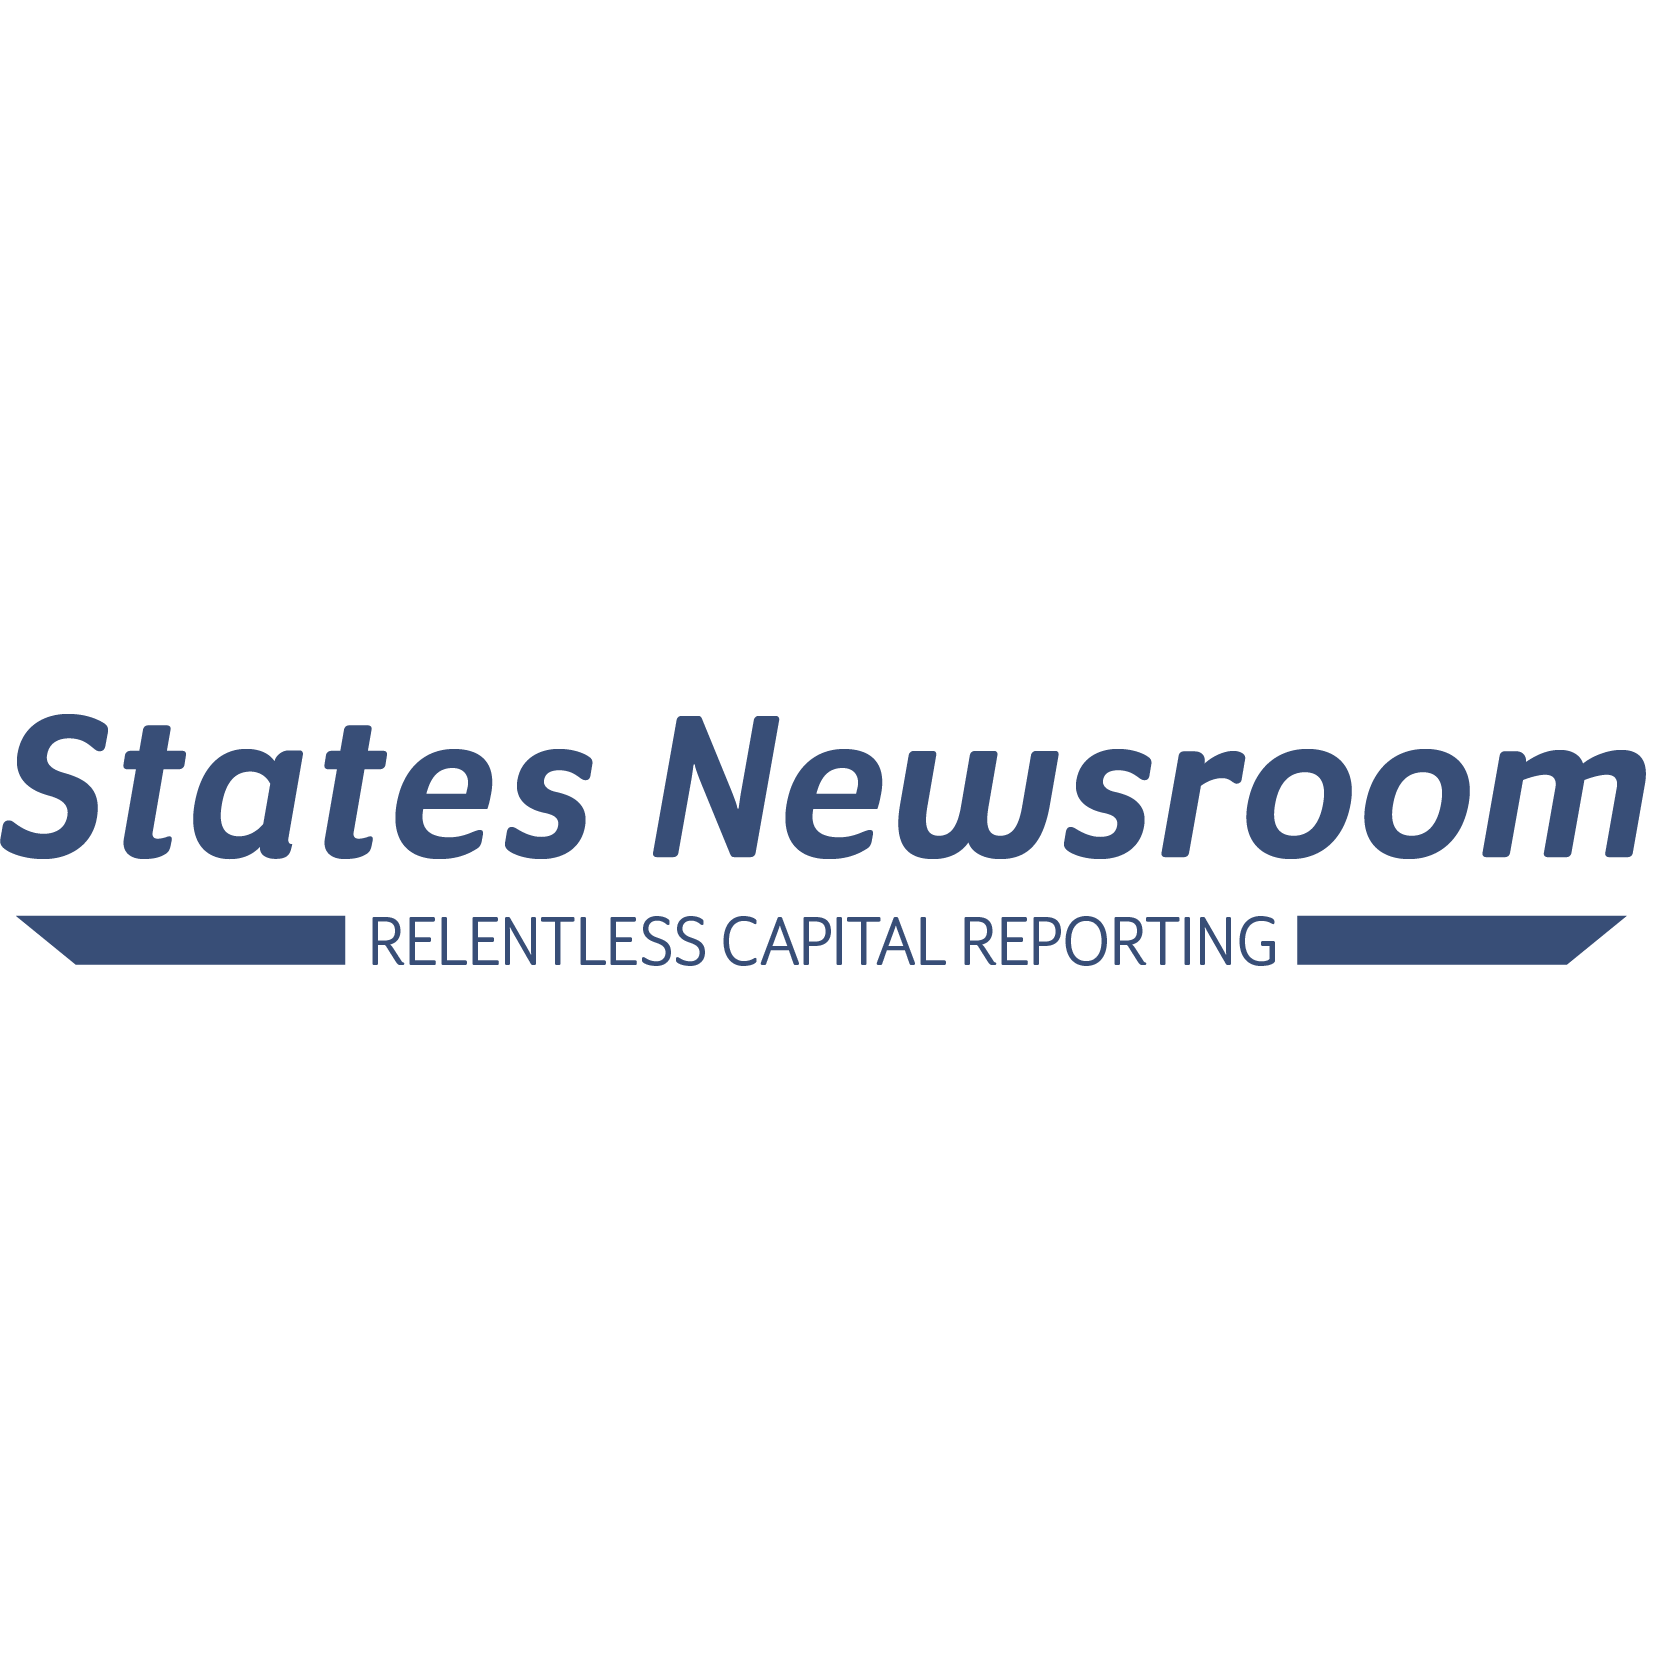 states-newsroom-launches-site-for-state-capital-news-talking-biz-news